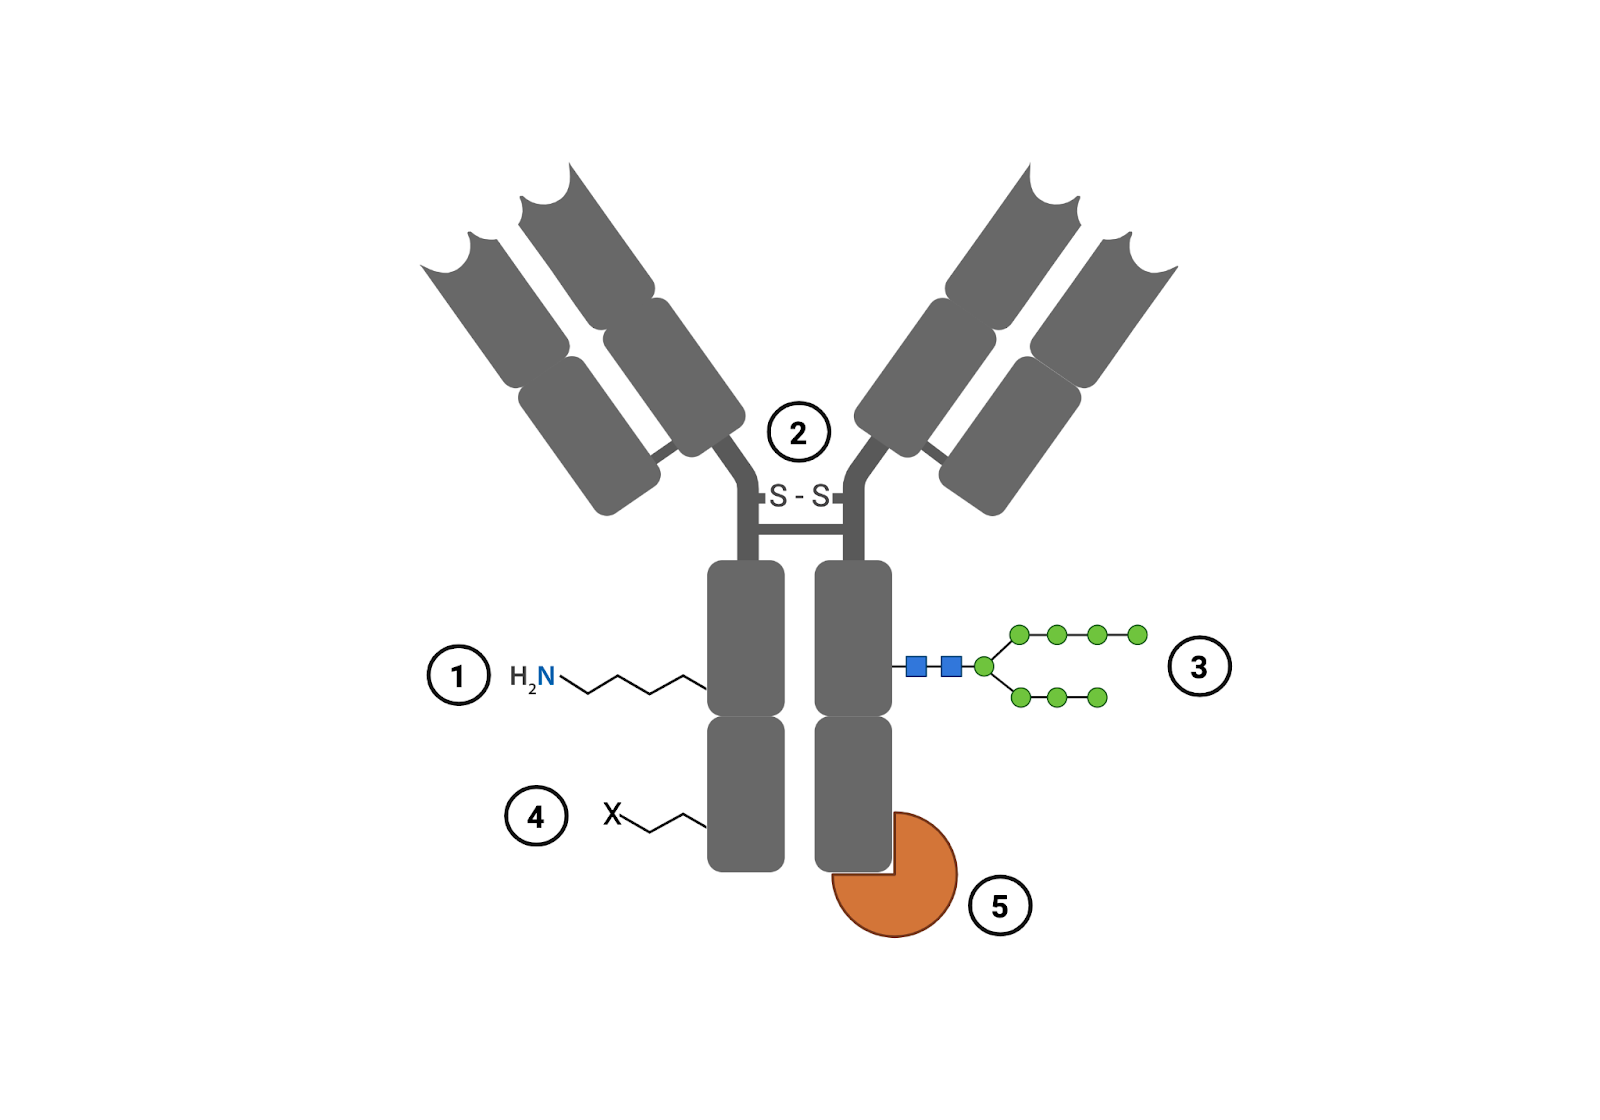 Antibody with five example conjugation sites indicated. Each site represents a different conjugation strategy, 1) lysine 2) cysteine 3) carbohydrate 4) sequence modifications 5) protein-protein interactions. 